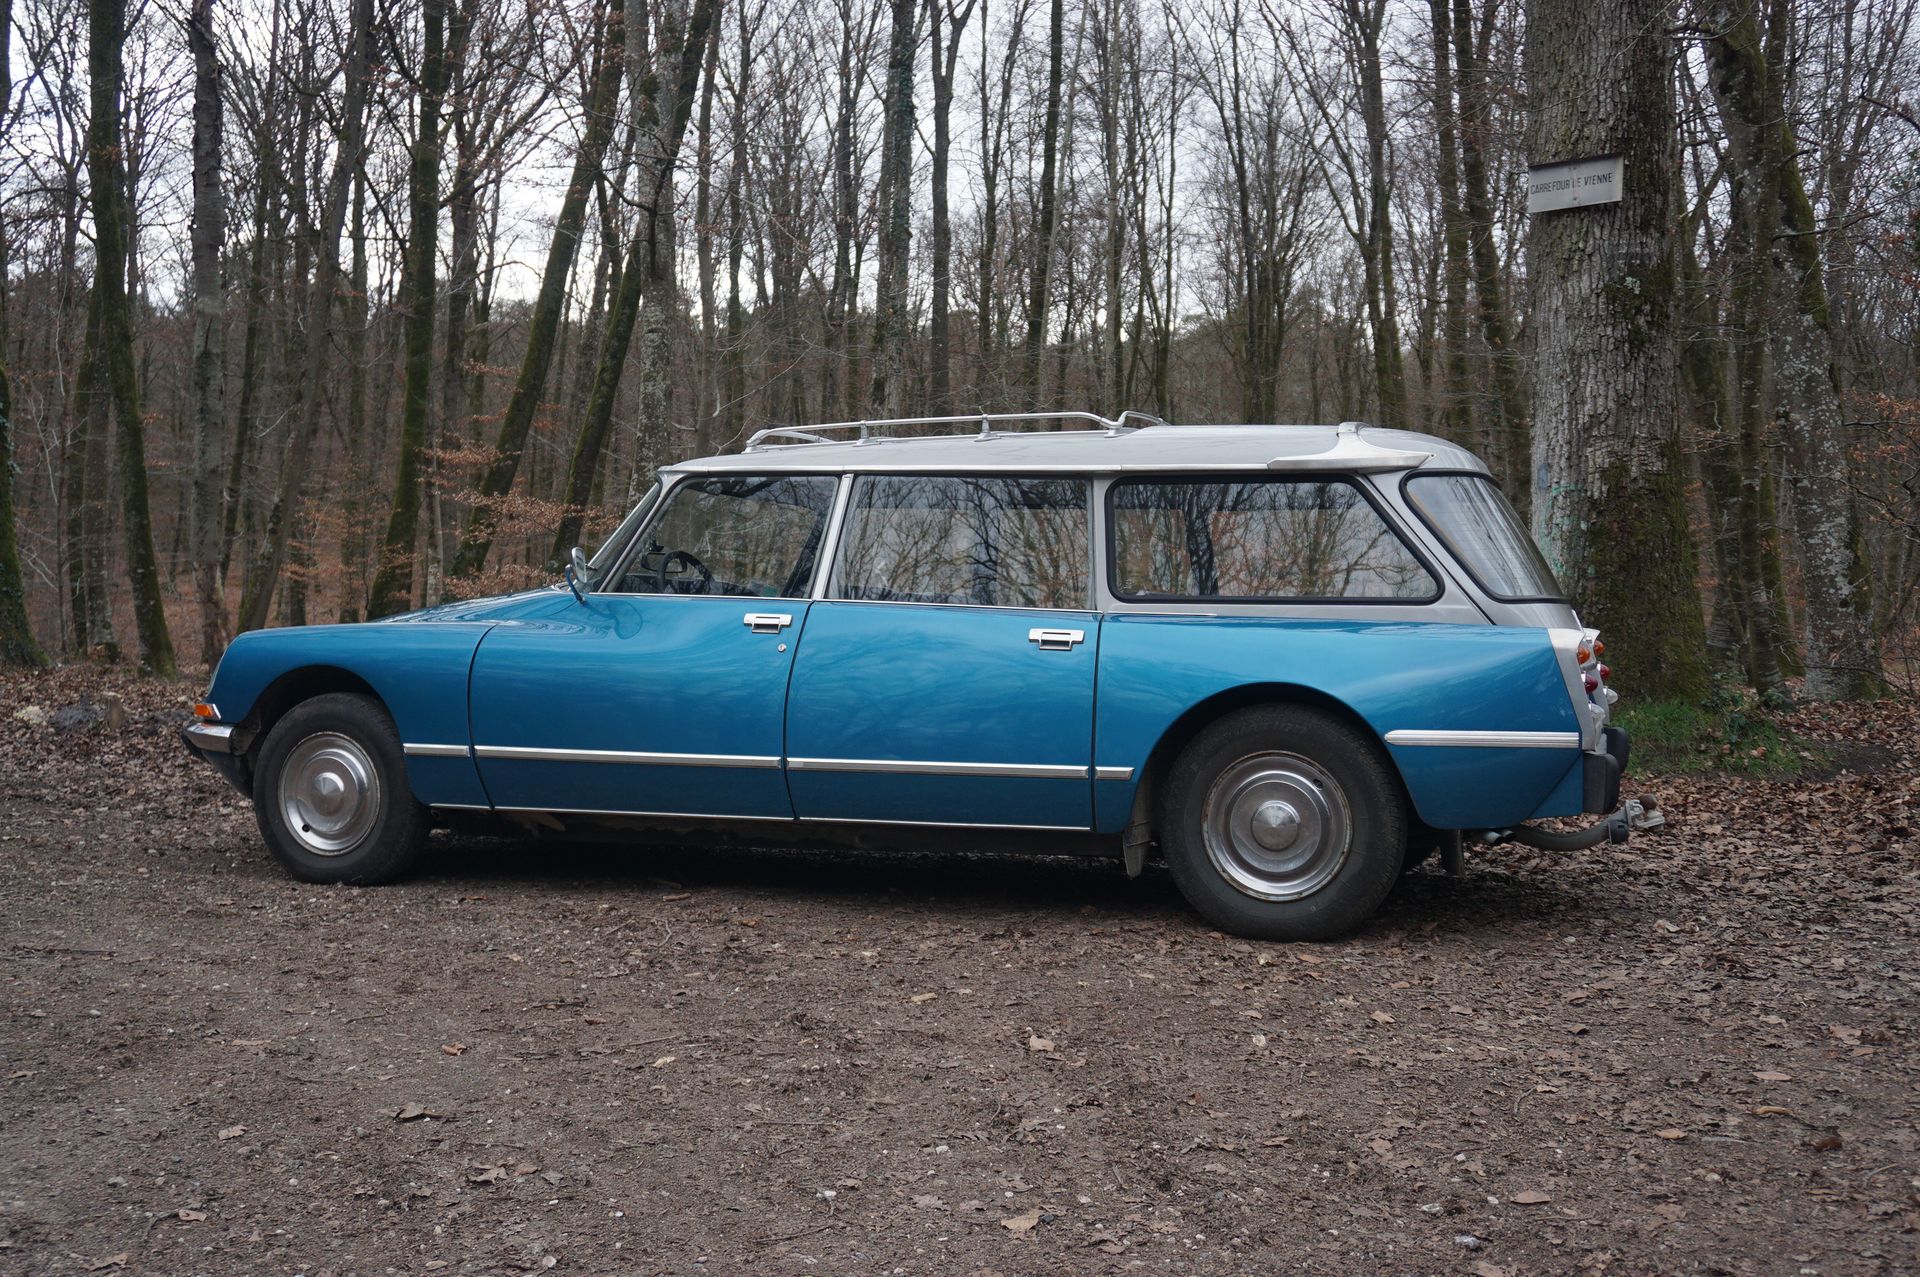 Null 1975 Citroën ID 20 F Estate Confort
Serial number 8414657 
One of the last &hellip;